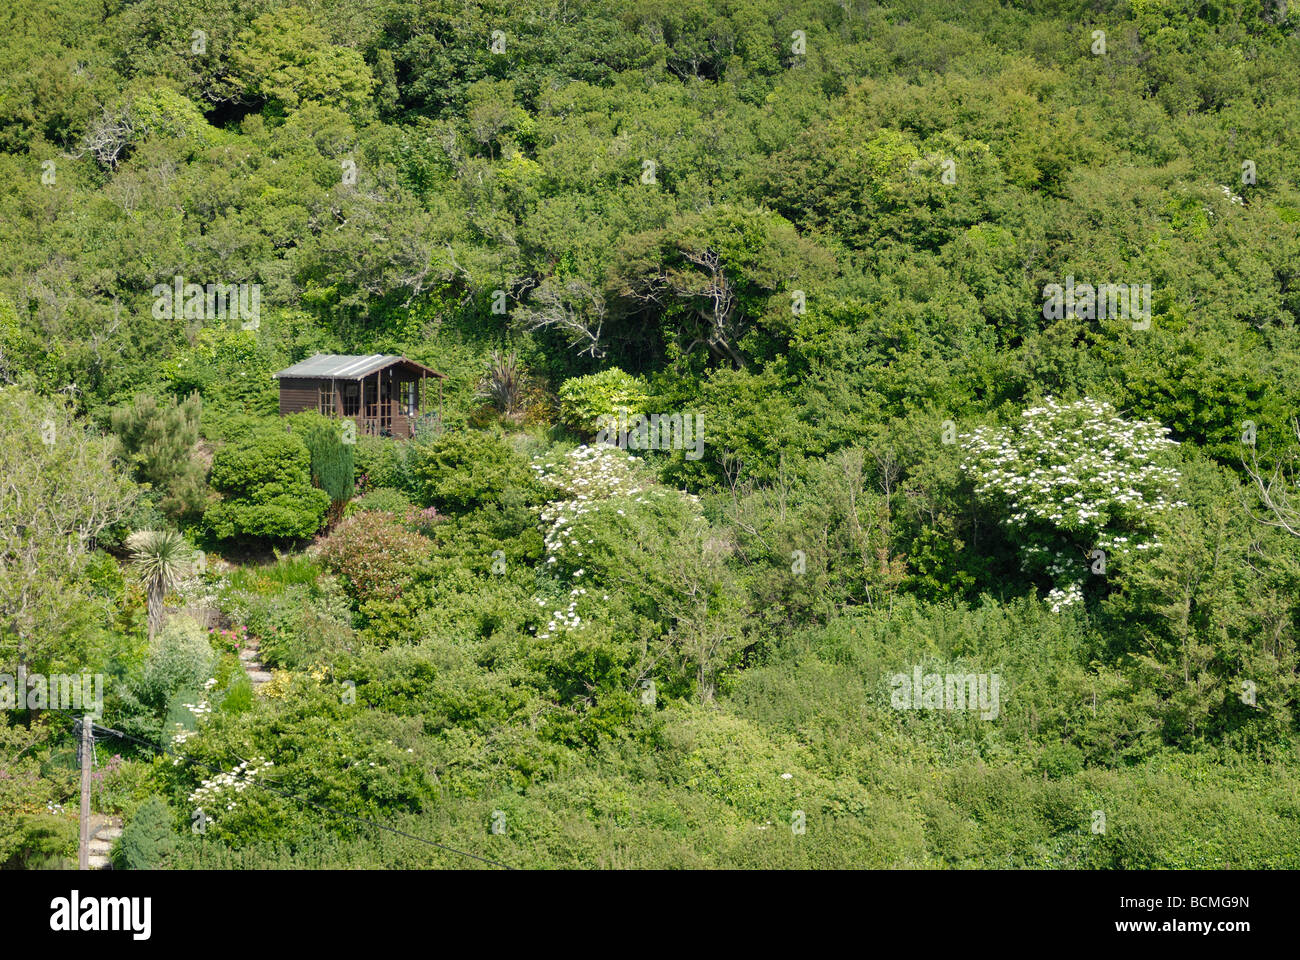 Garden shed surrounded by undergrowth Stock Photo